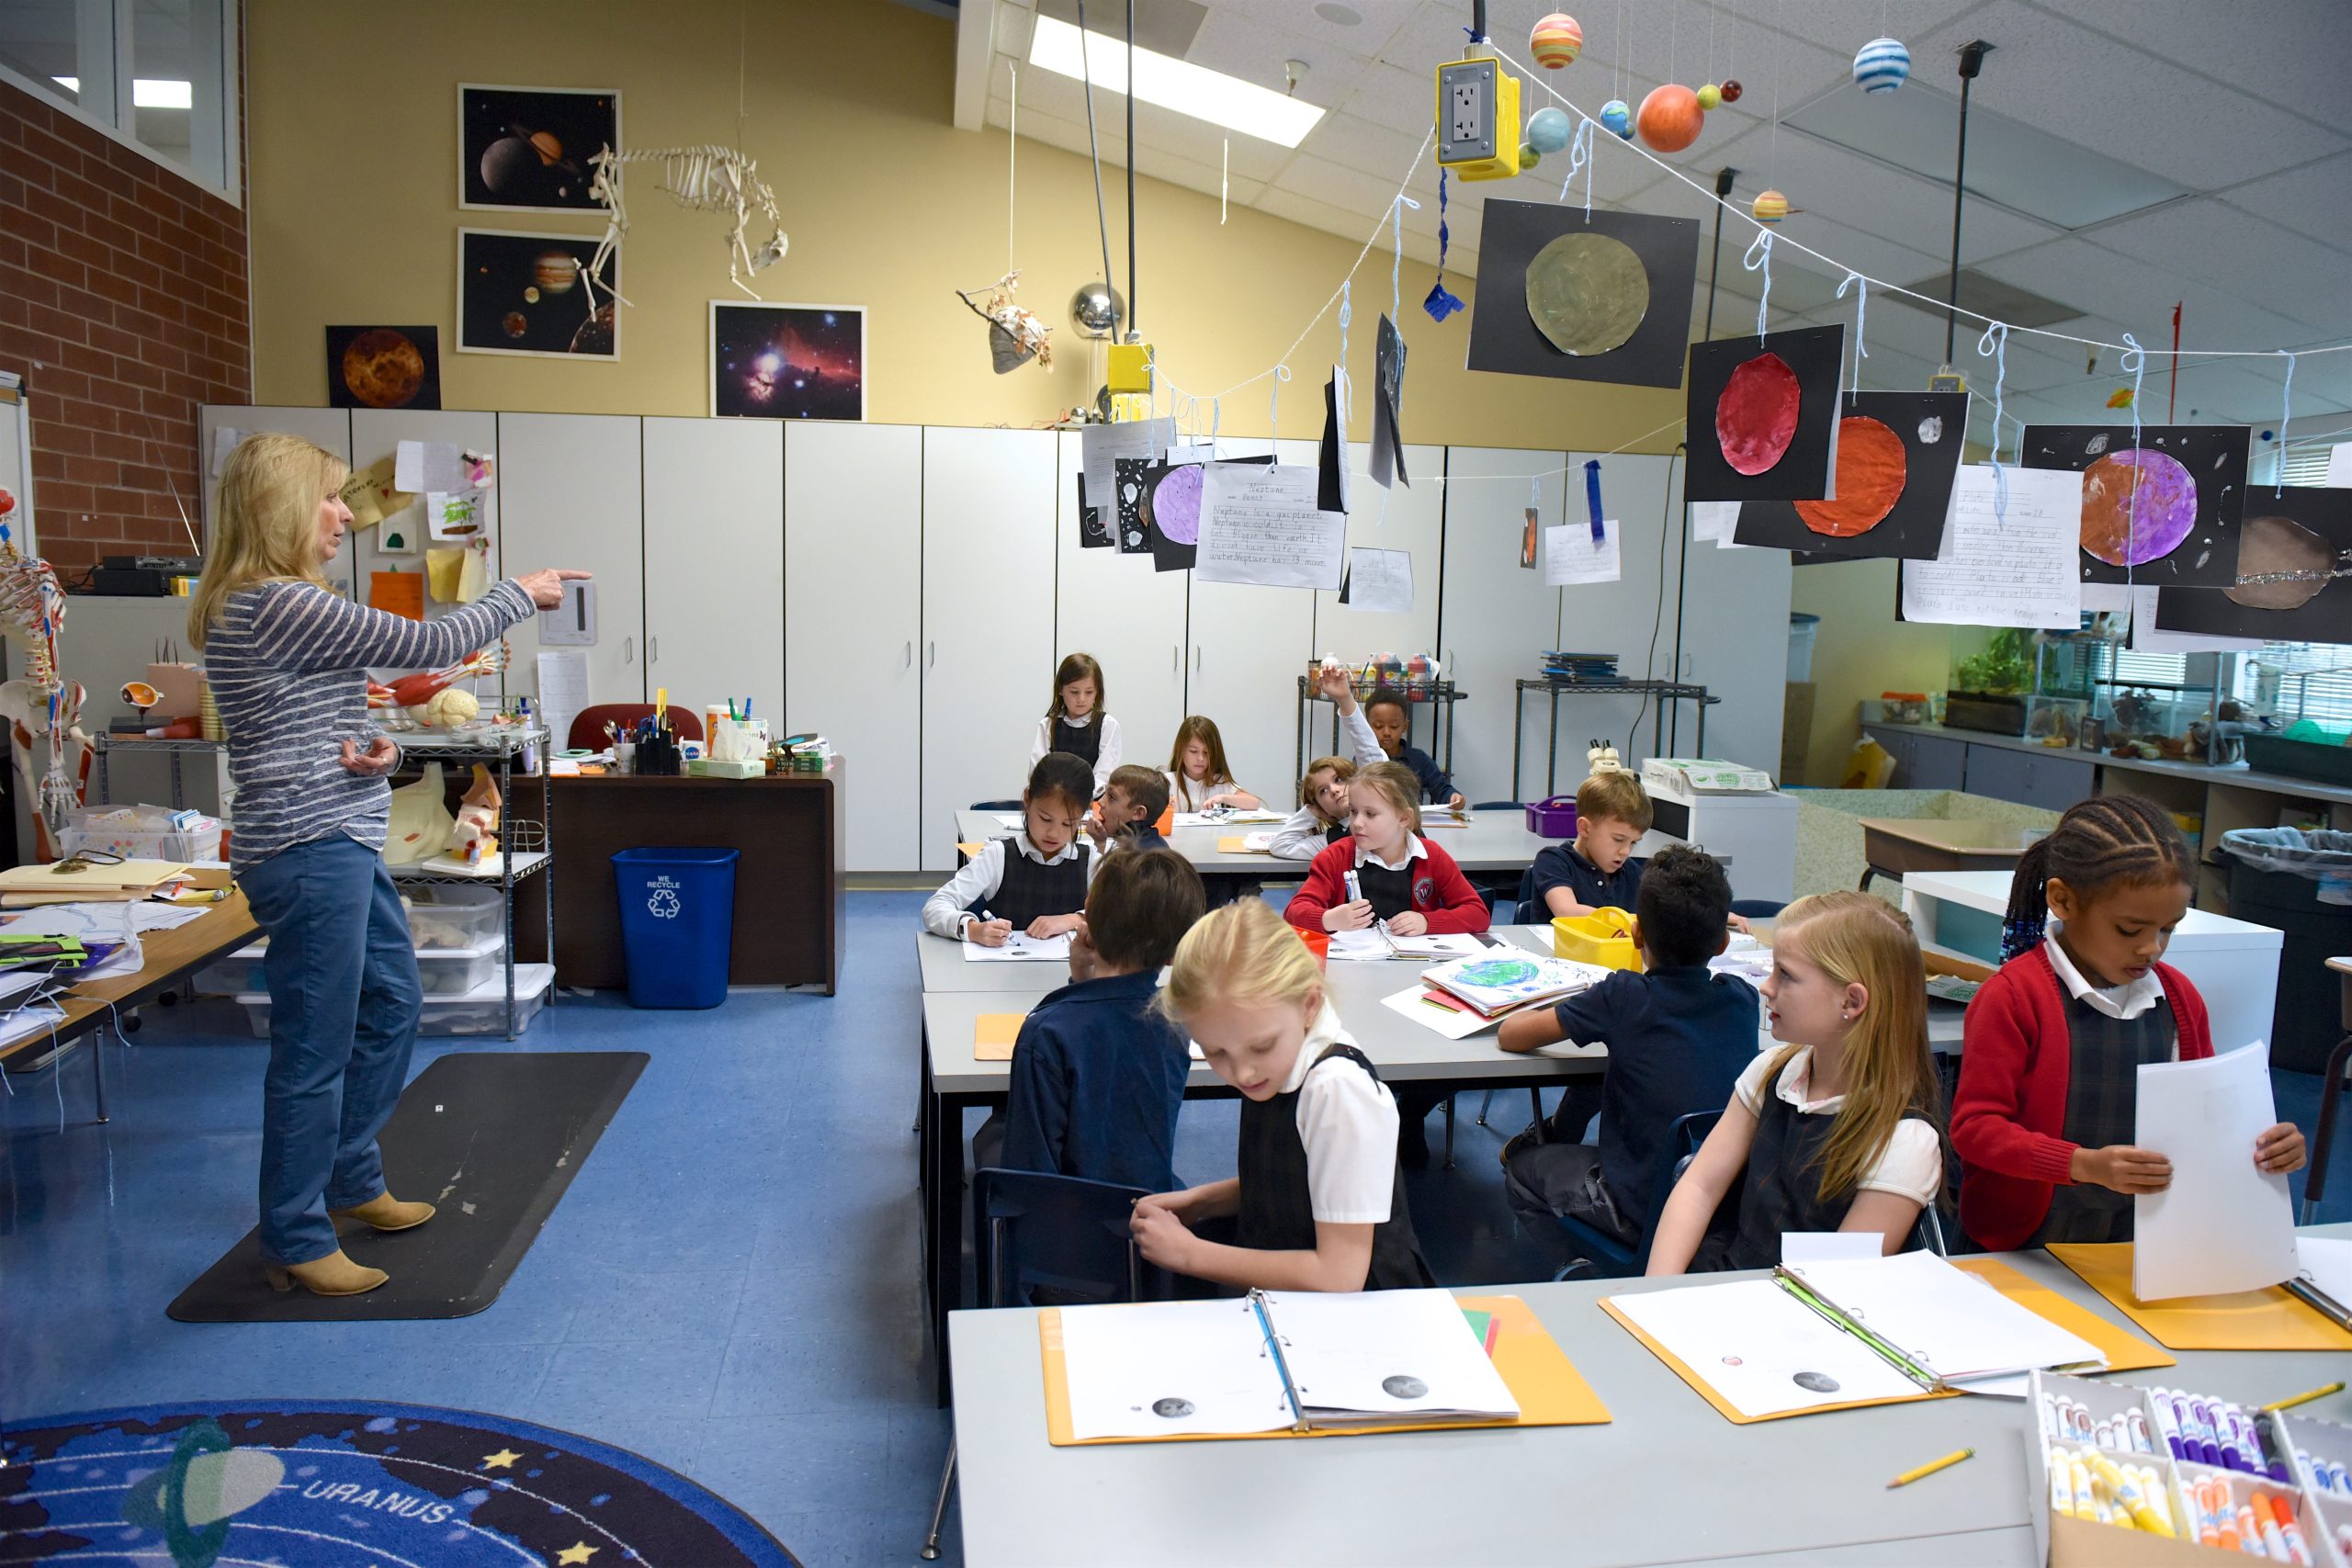 Waterford's Class I science lab is an inviting and stimulating environment that inspires scientific thought and curiosity.